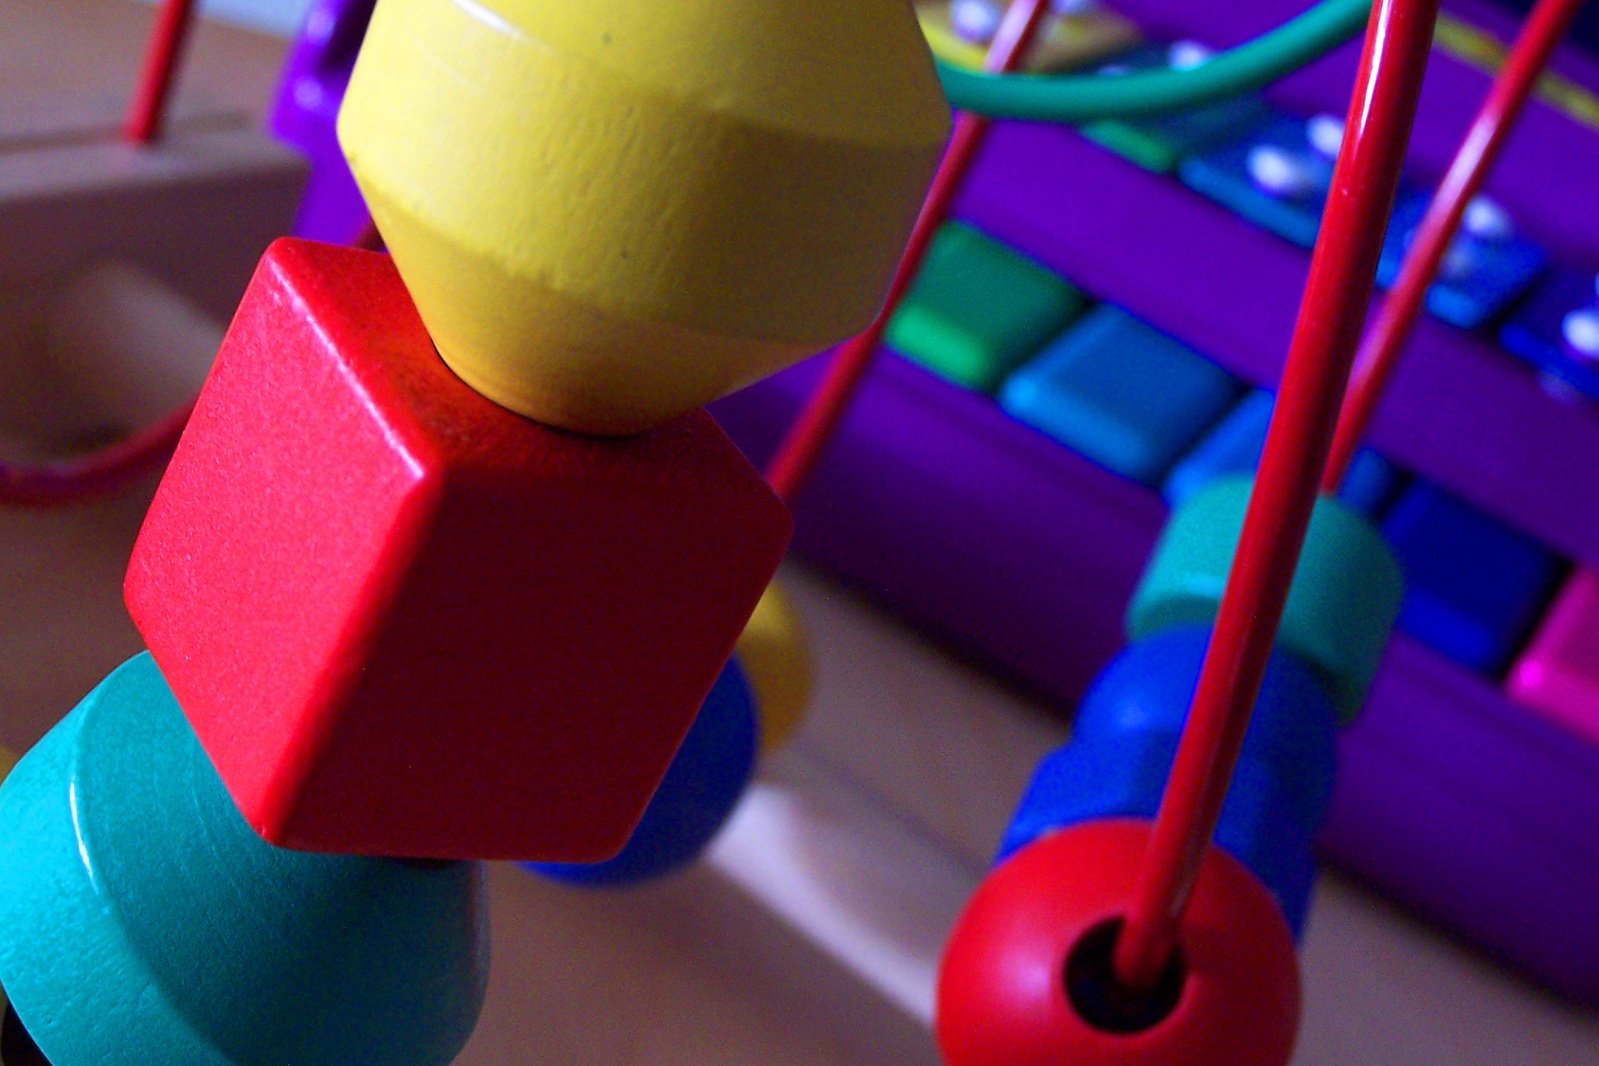 colorful toys are on display on a table